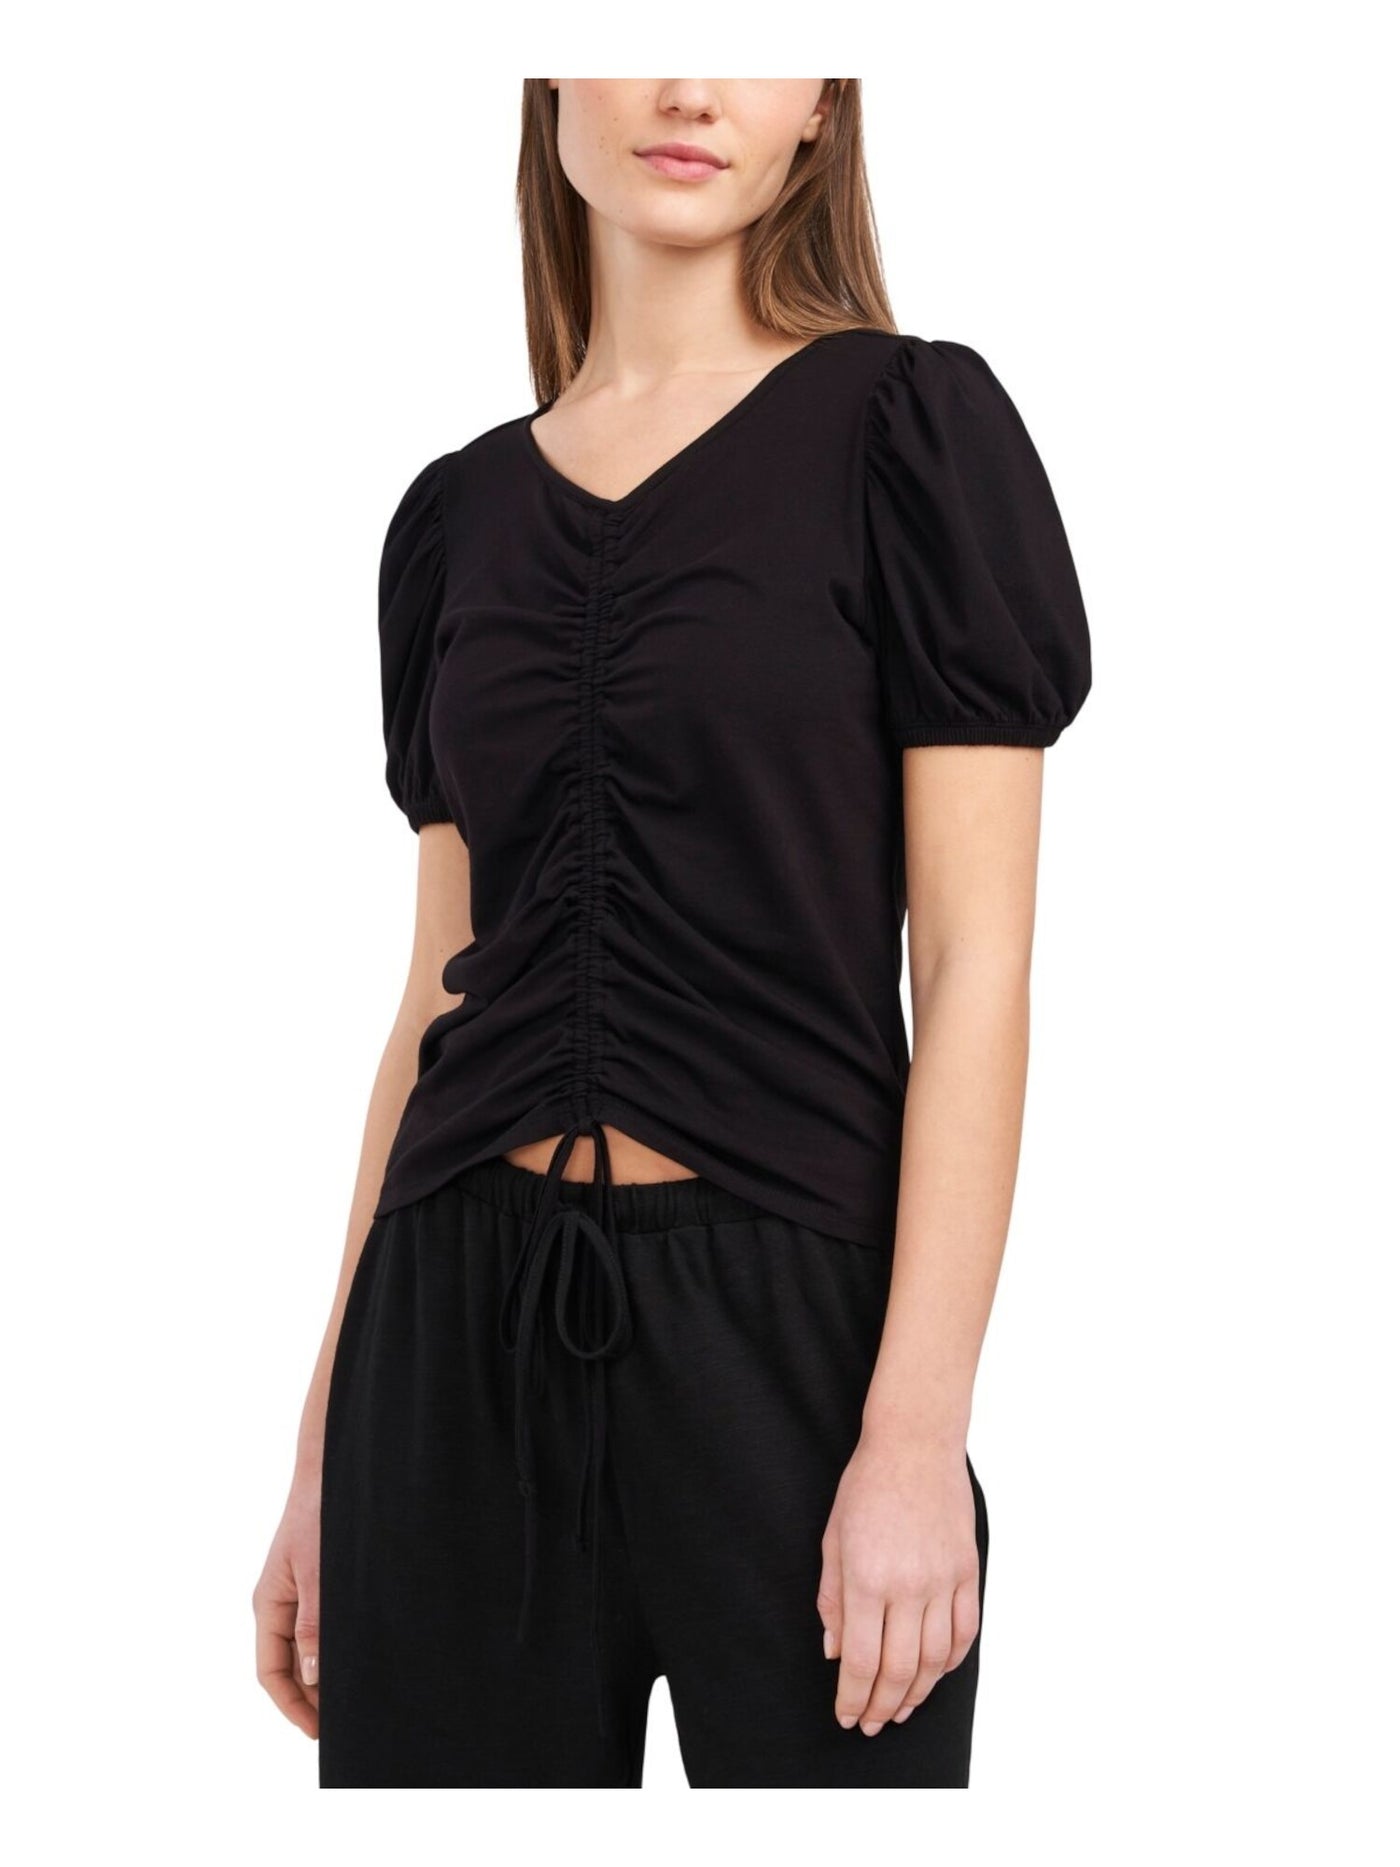 RILEY&RAE Womens Black Ruched Pouf Sleeve V Neck Top XS